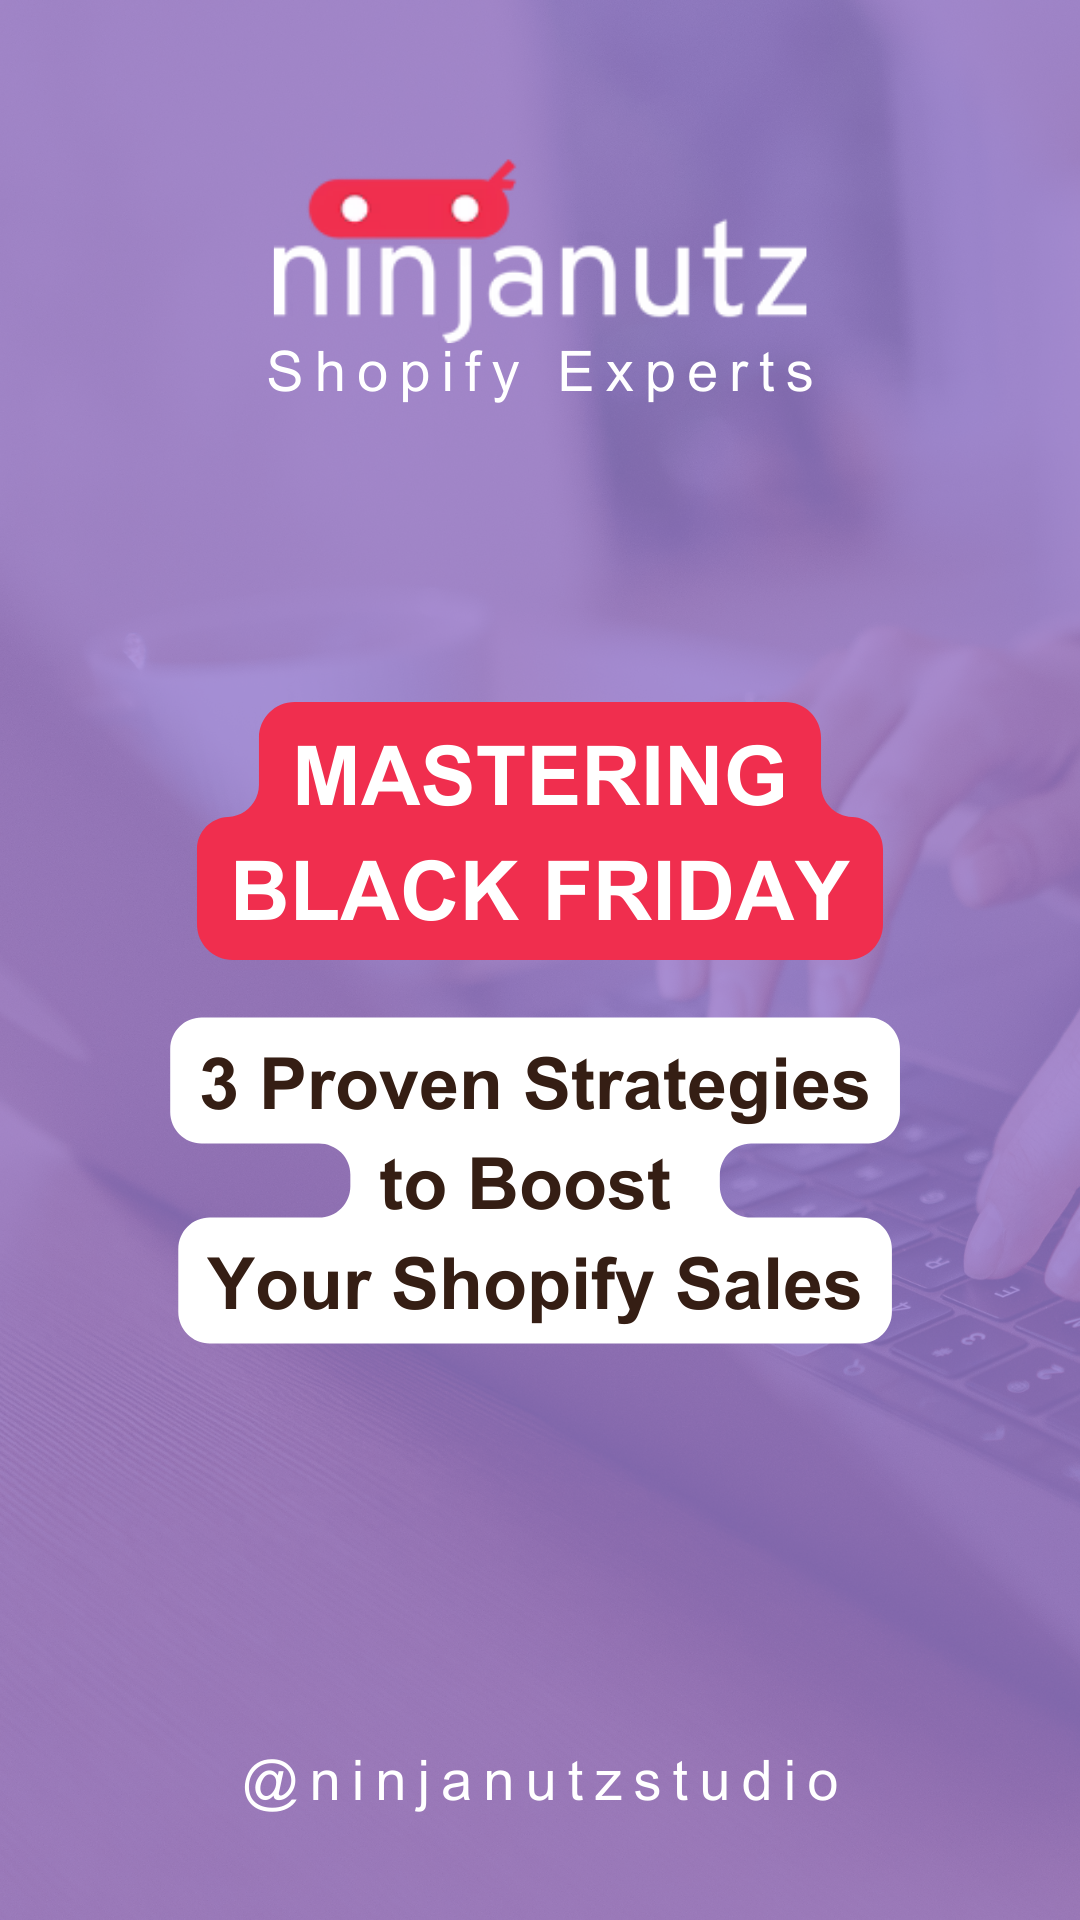 Mastering Black Friday: 3 Proven Strategies to Boost Your Shopify Sales NinjaNutz®